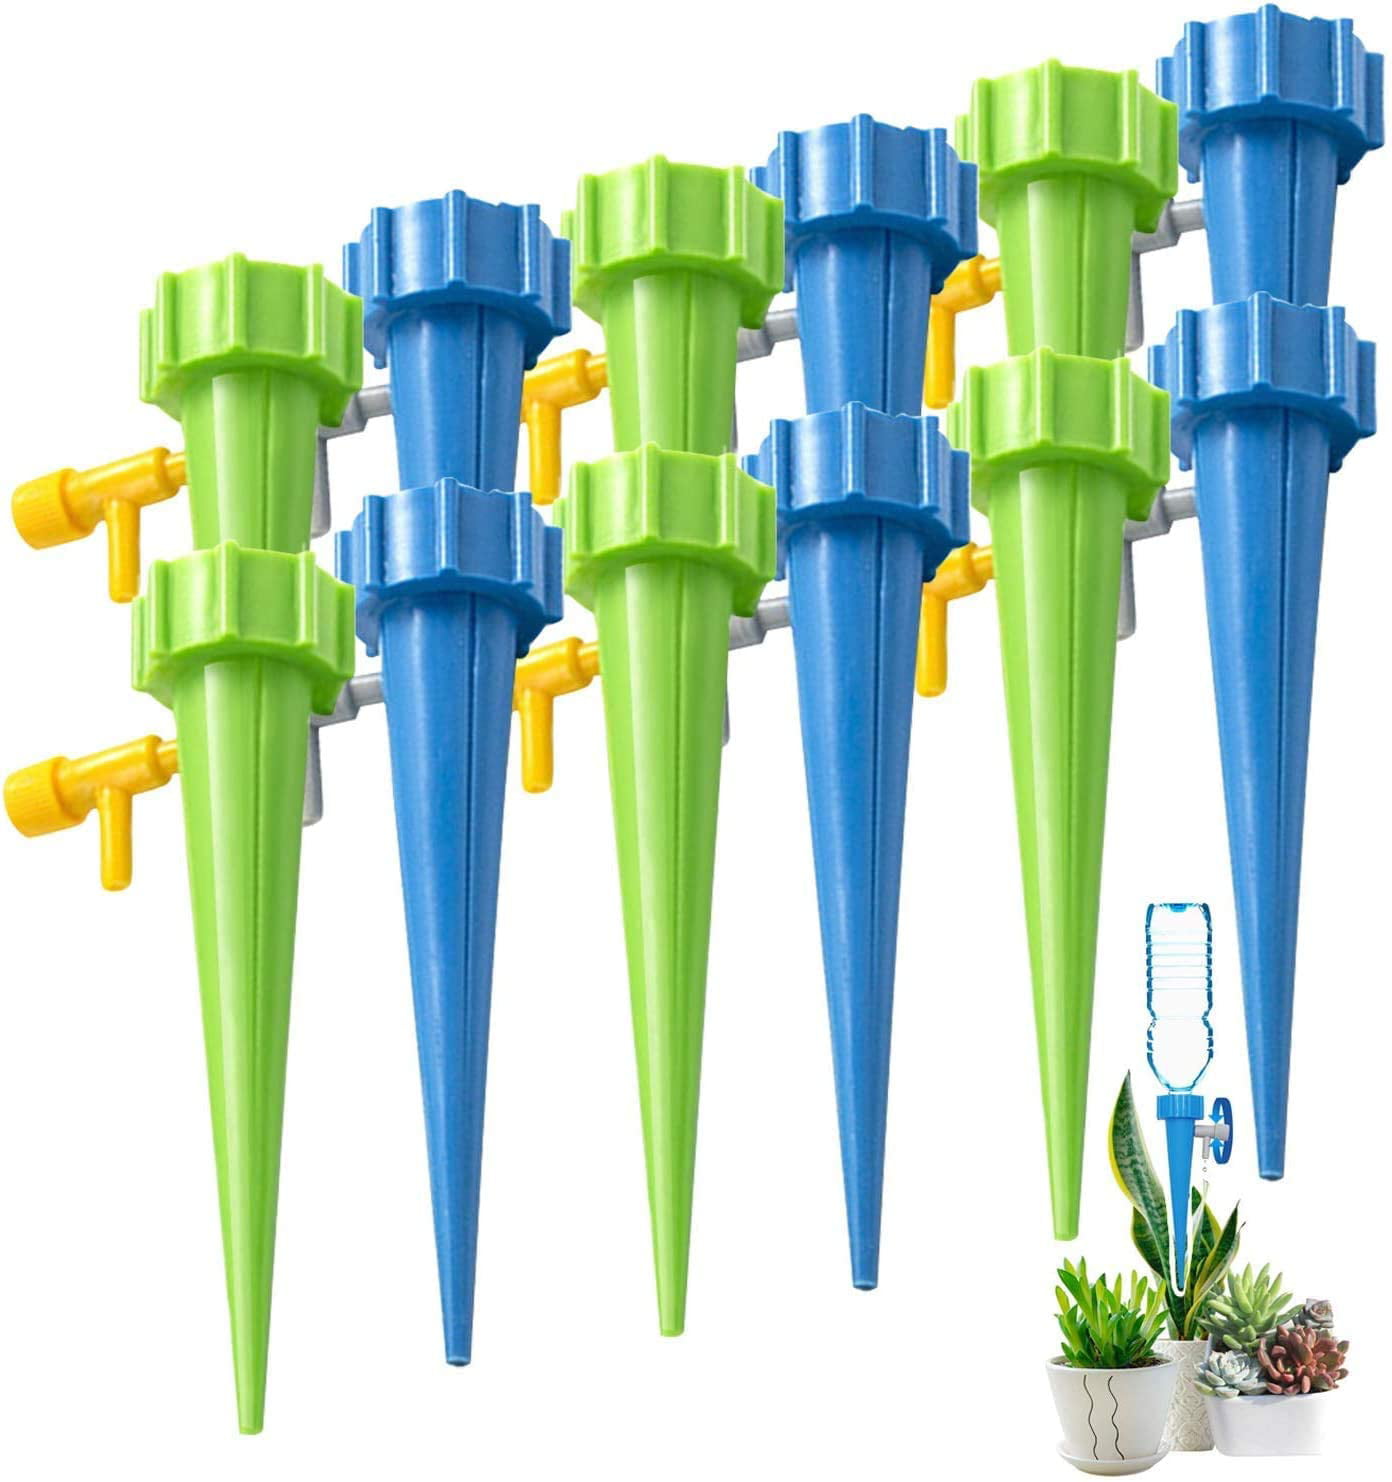 WTSHOP 12 Pack Plant Water Self Watering,Self Irrigation Watering drip Bulbs System,Plant Waterer Self Watering Devices with Slow Release Control Valve Switch 